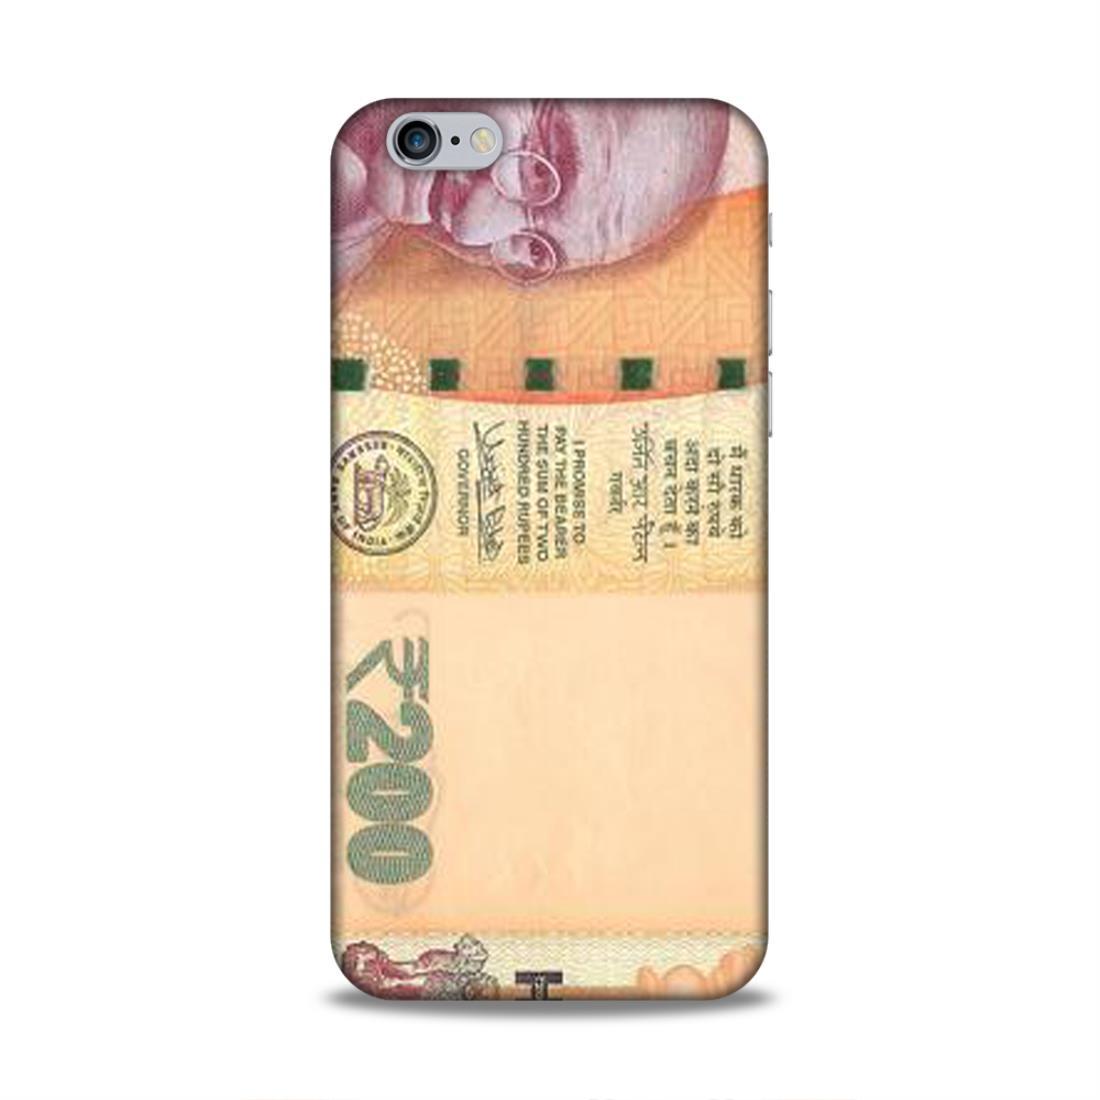 Rs 200 Currency Note iPhone 6 Phone Case Cover